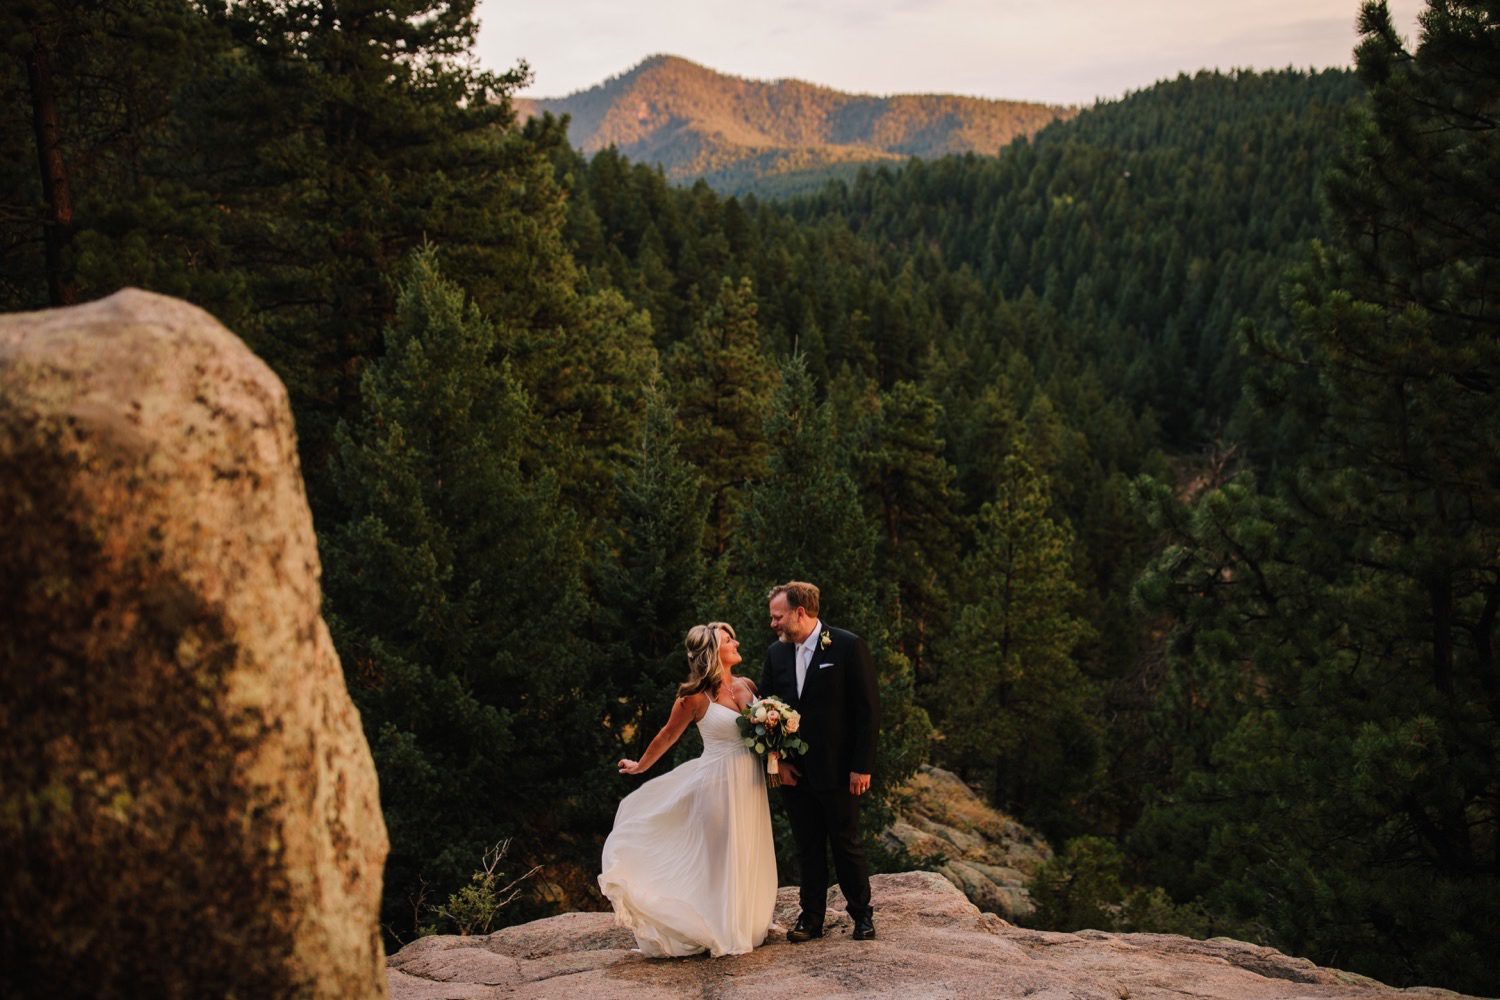 Bride and groom with pine trees and rocky mountain view